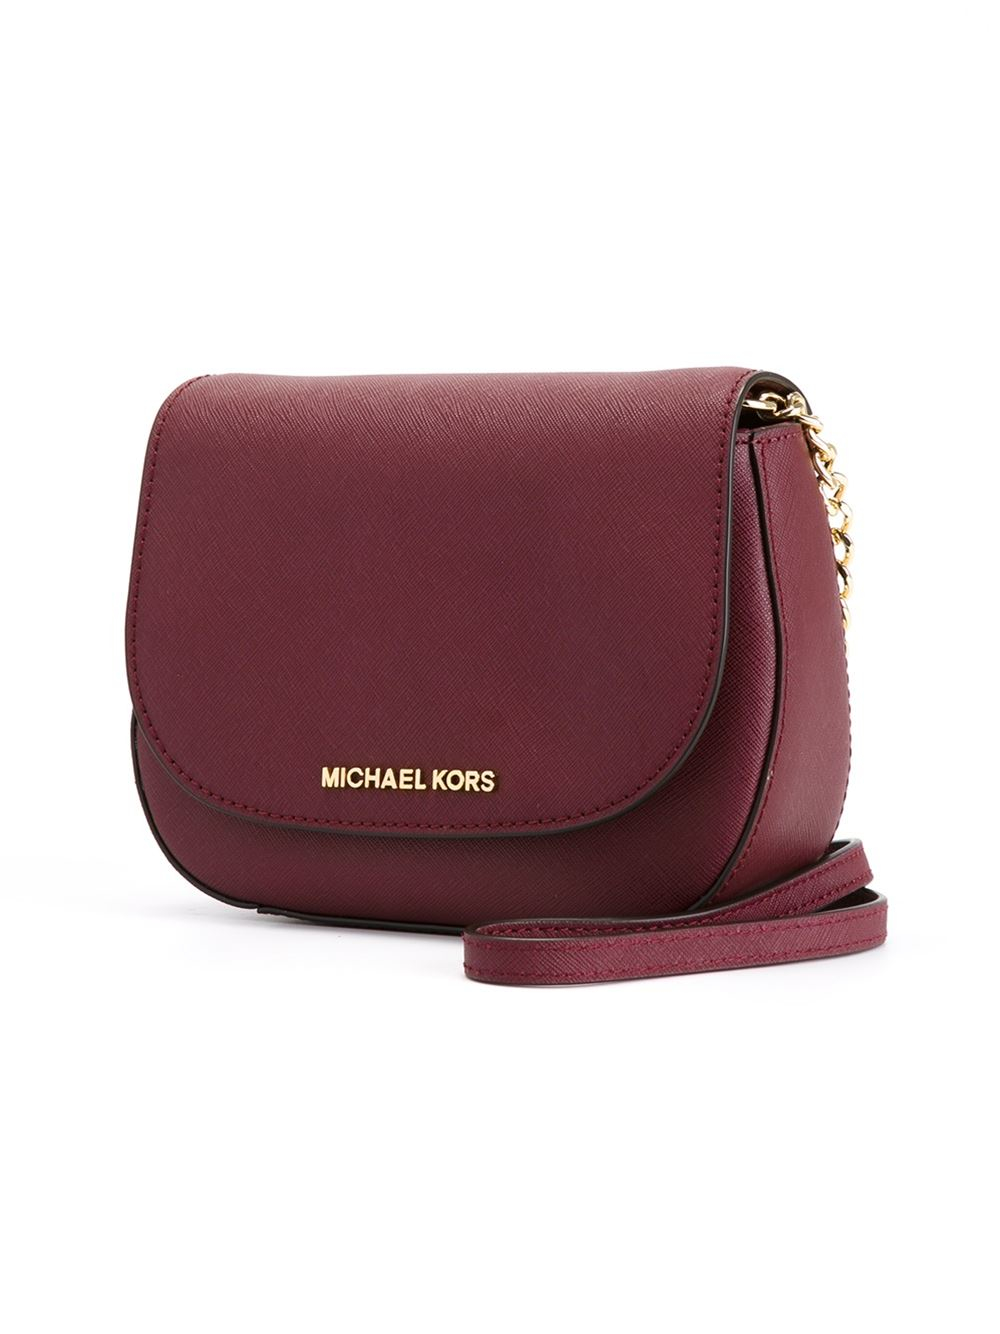 Michael Kors Crossover Body Bag Outlet  jackiesnewscouk 1691347445